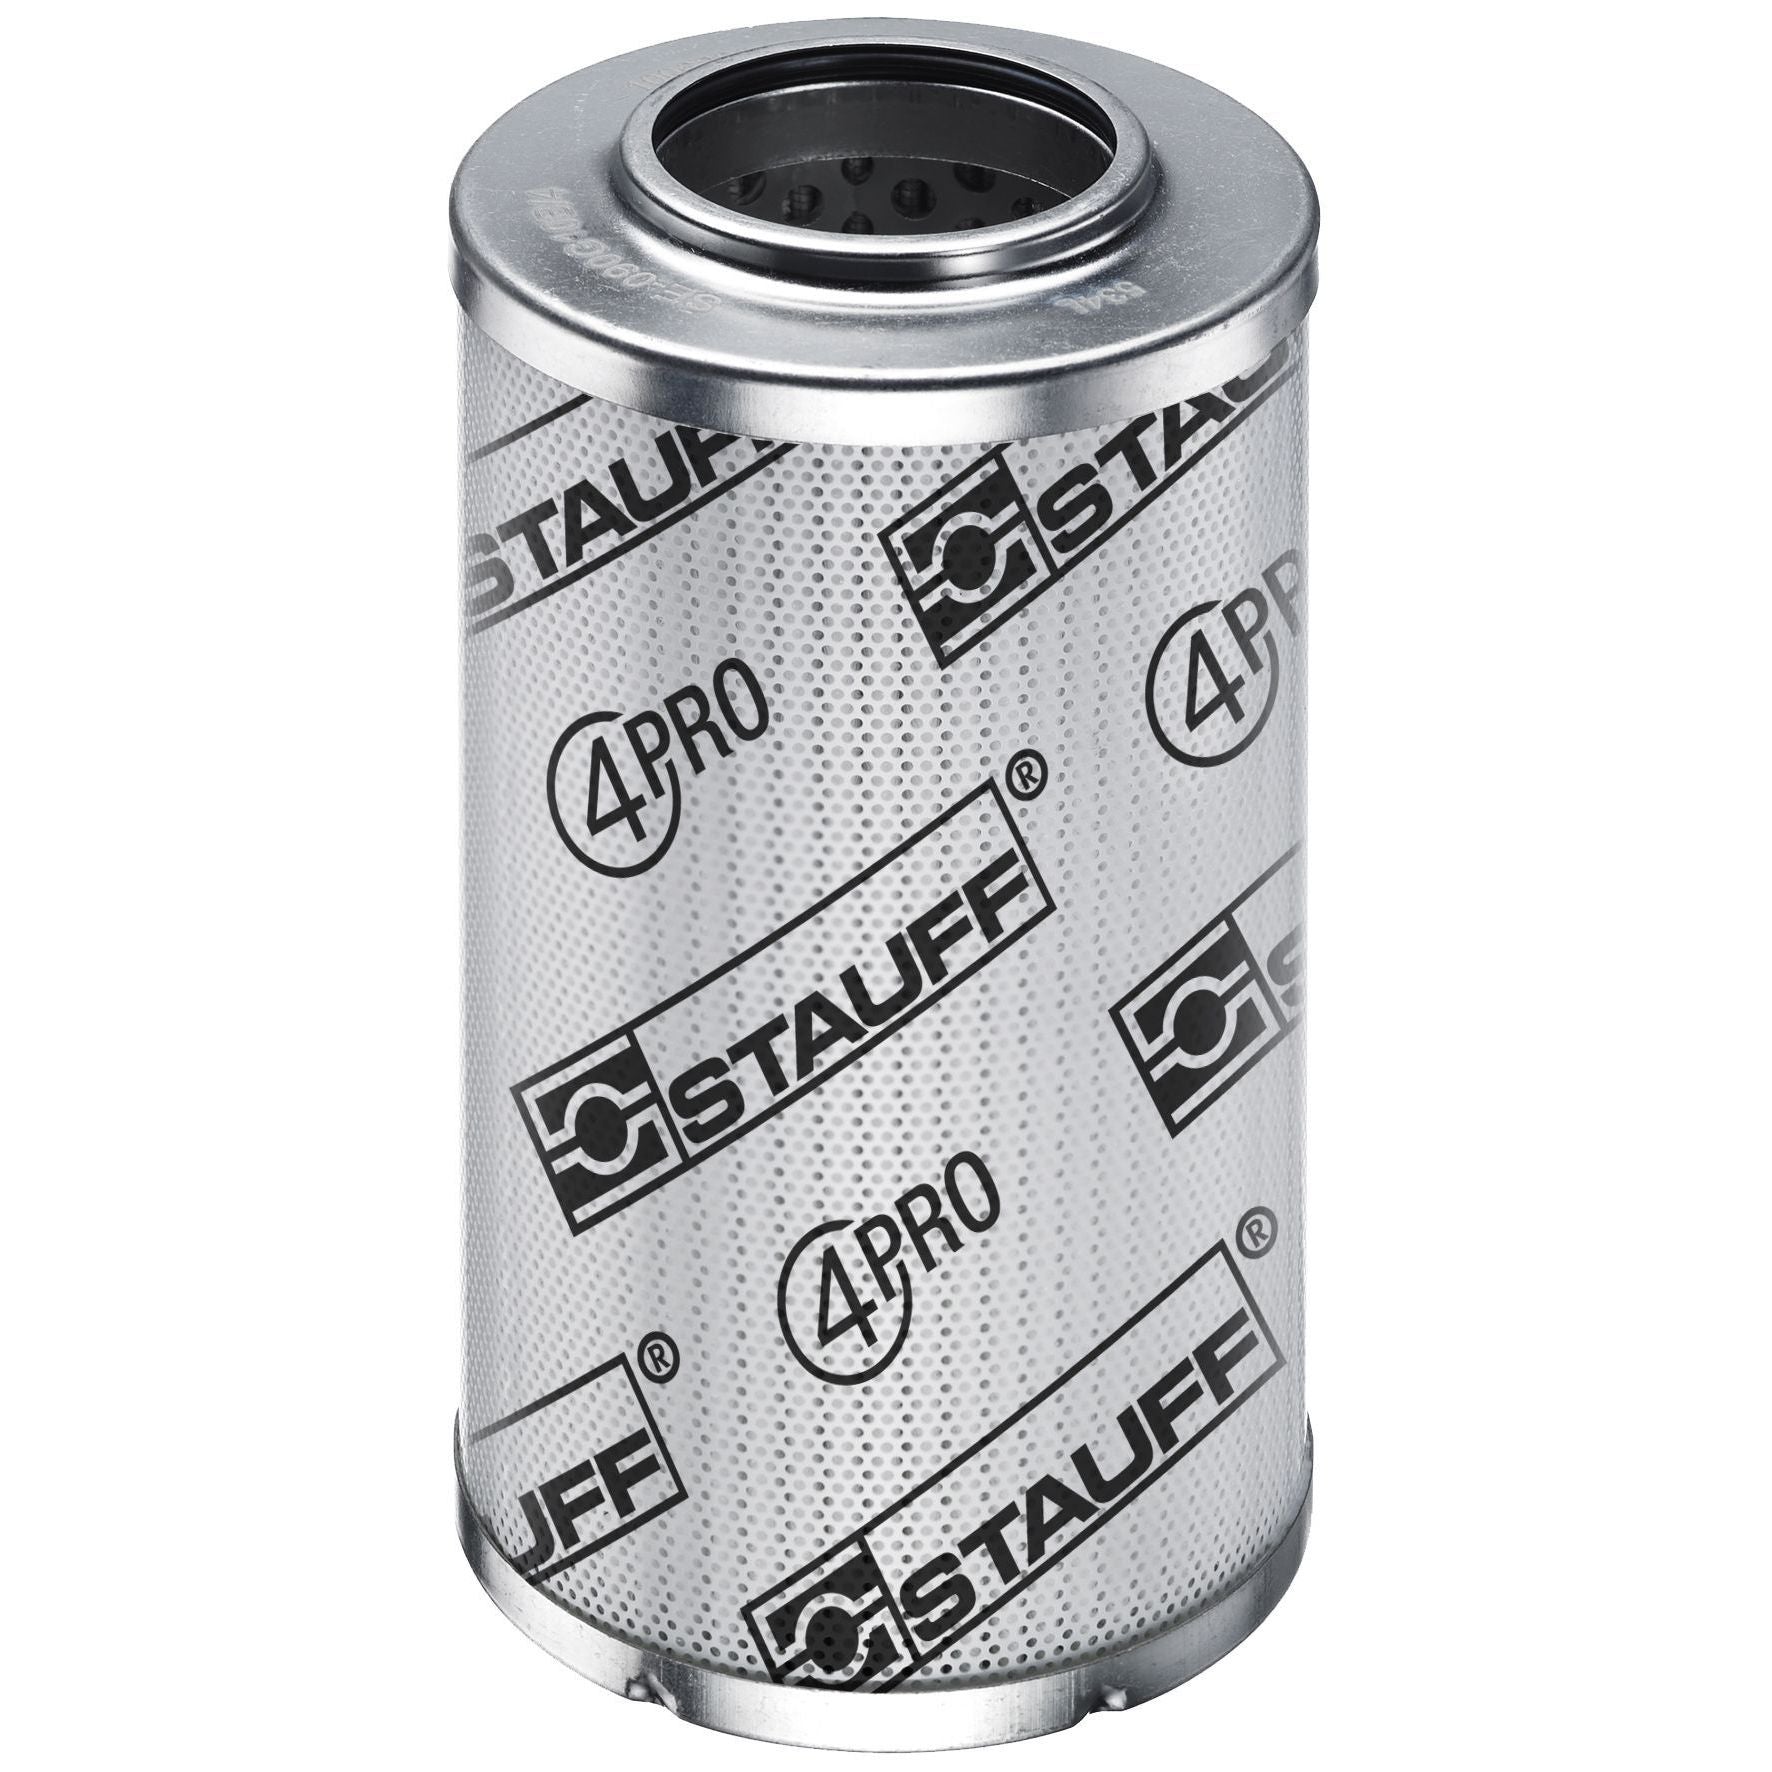 SE-070-G-05-E/4 : Stauff SF-070 Series Filter Element, 5 Micron, Synthetic, 363psi Collapse Differential, EPDM Seals